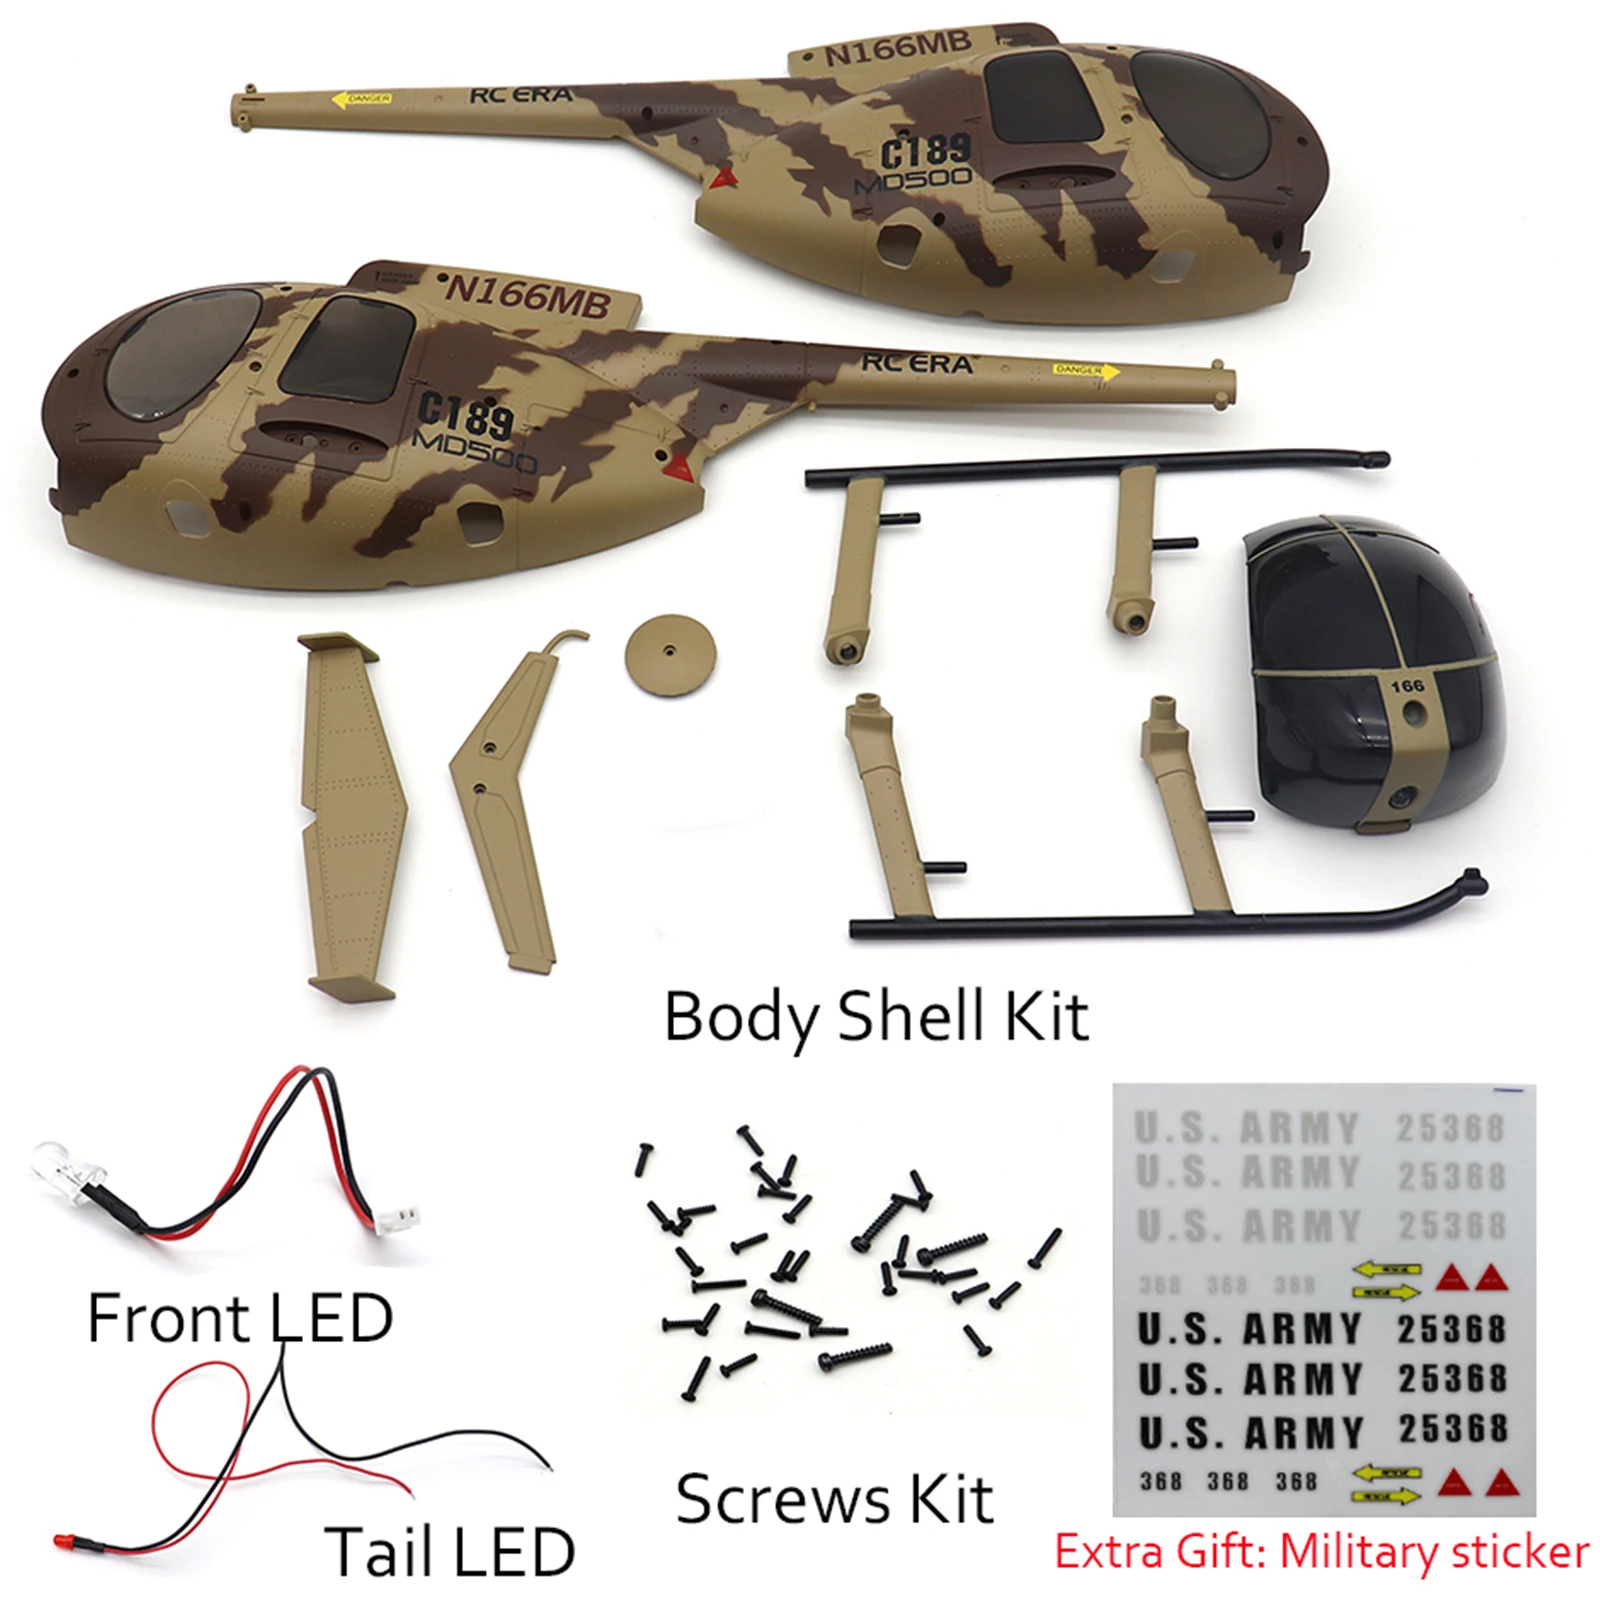 RC ERA for C189 Bird MD500 1:28 Scaled Helicopter Body Kit Brown - $42.77